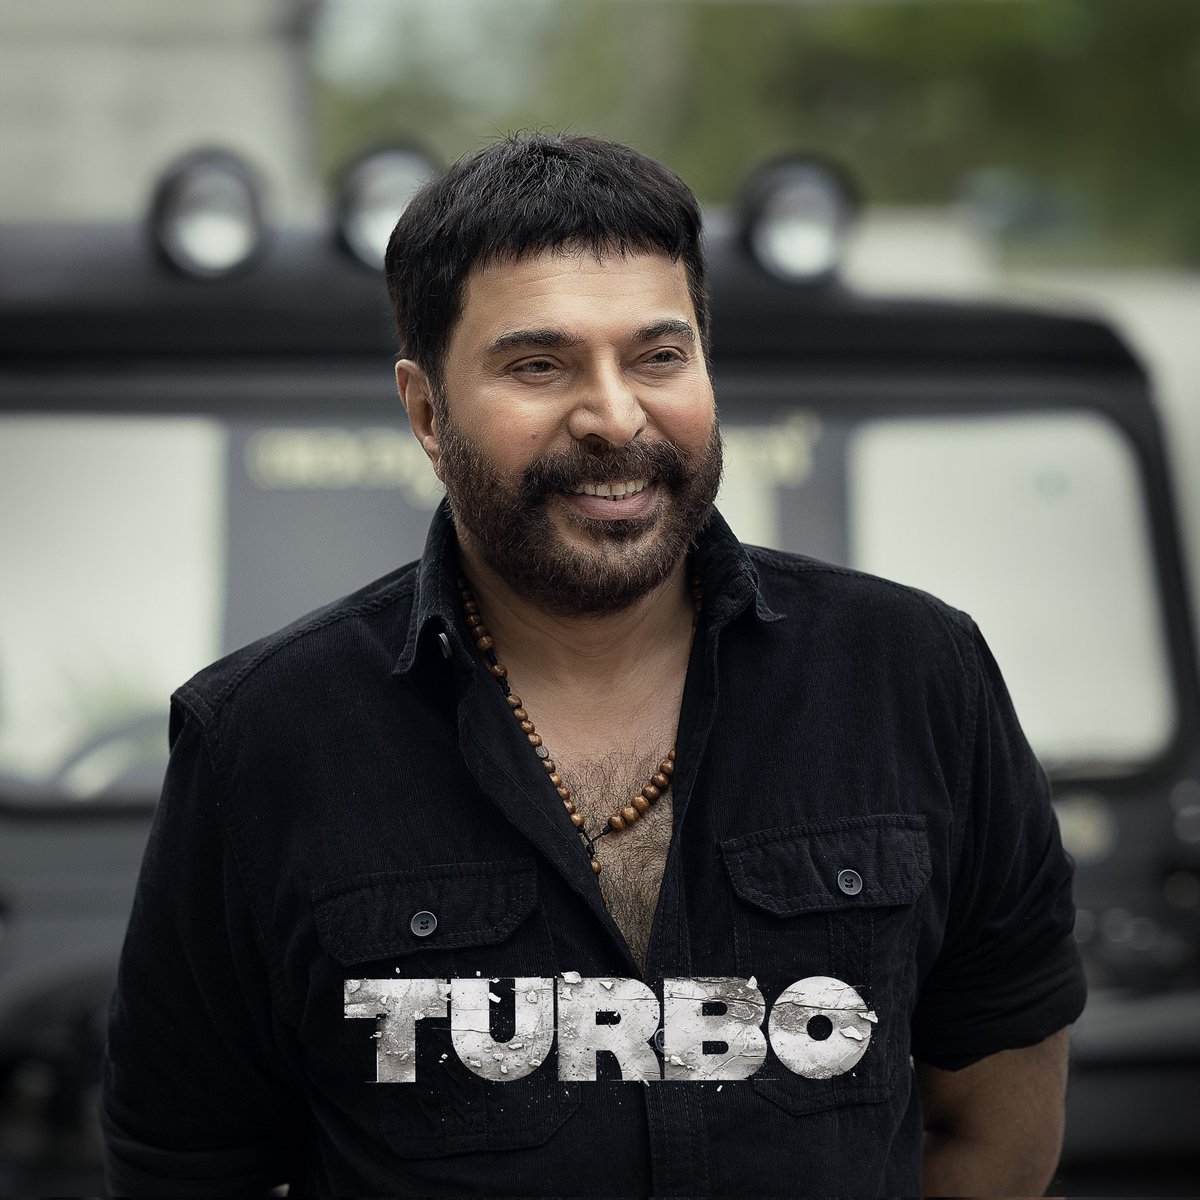 Who all are Waiting for #Turbo Trailer ??!! 🔥 Official Trailer Releasing Tomorrow at 9 PM IST #Mammootty #MammoottyKampany #TurboMovie #WayfarerFilms